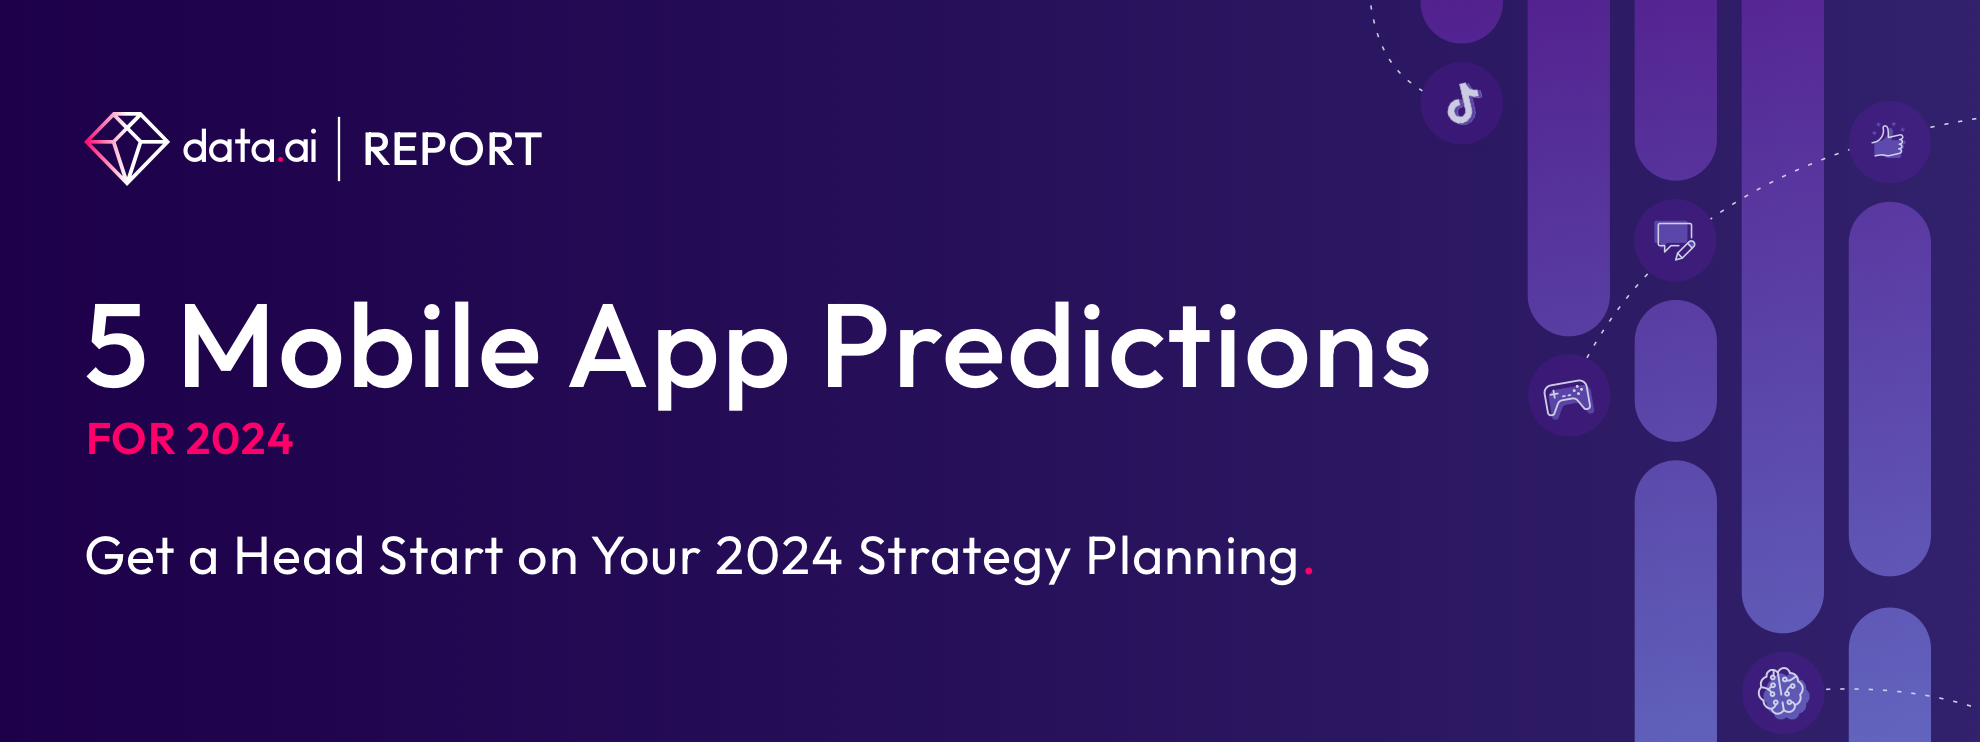 5 Mobile App Predictions for 2024